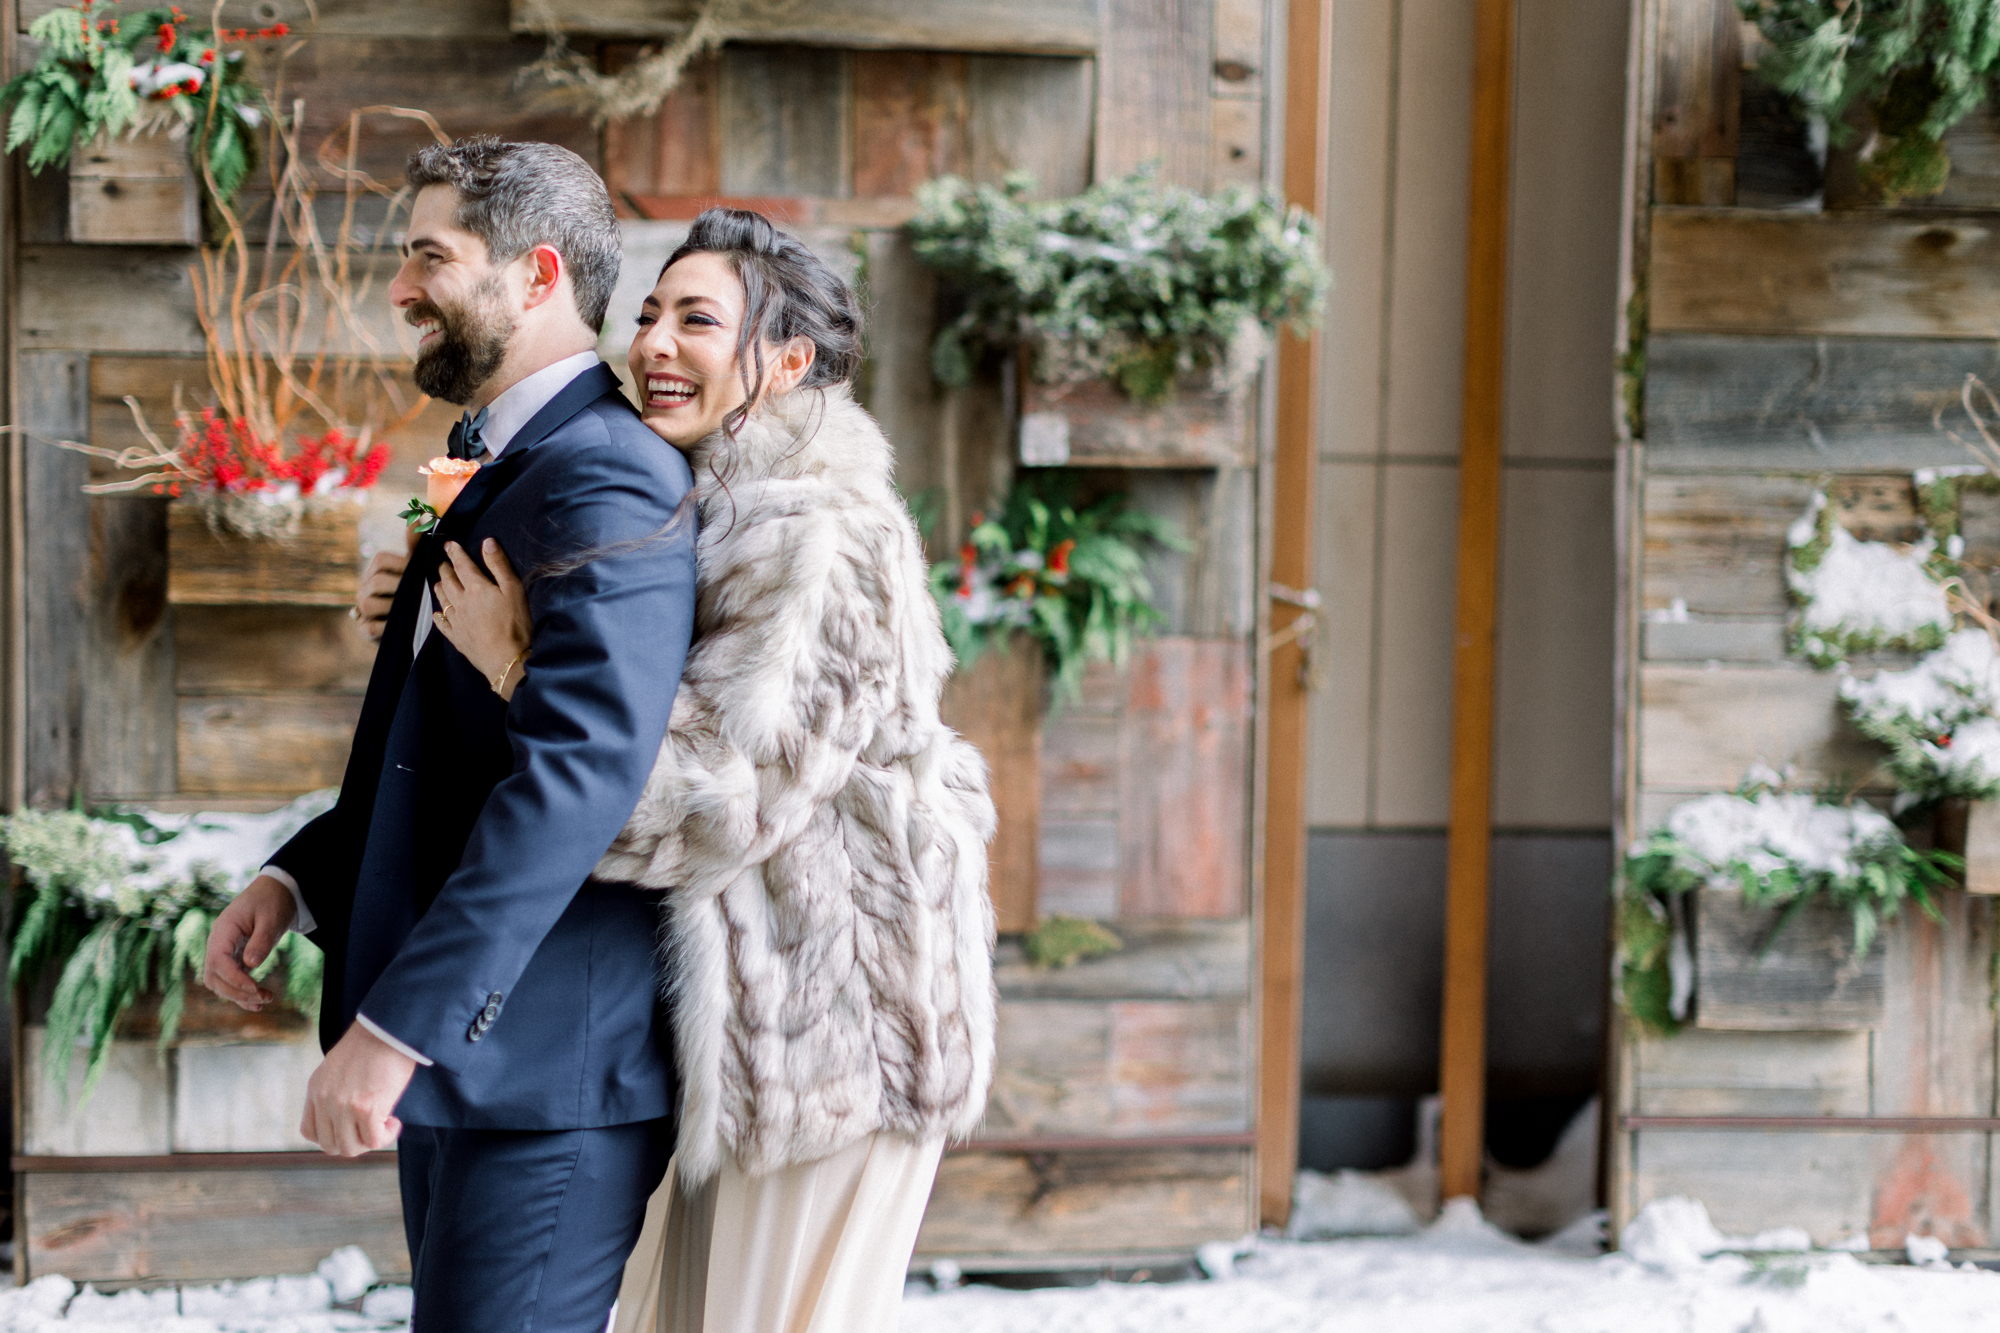 Candid wedding photography in New York City